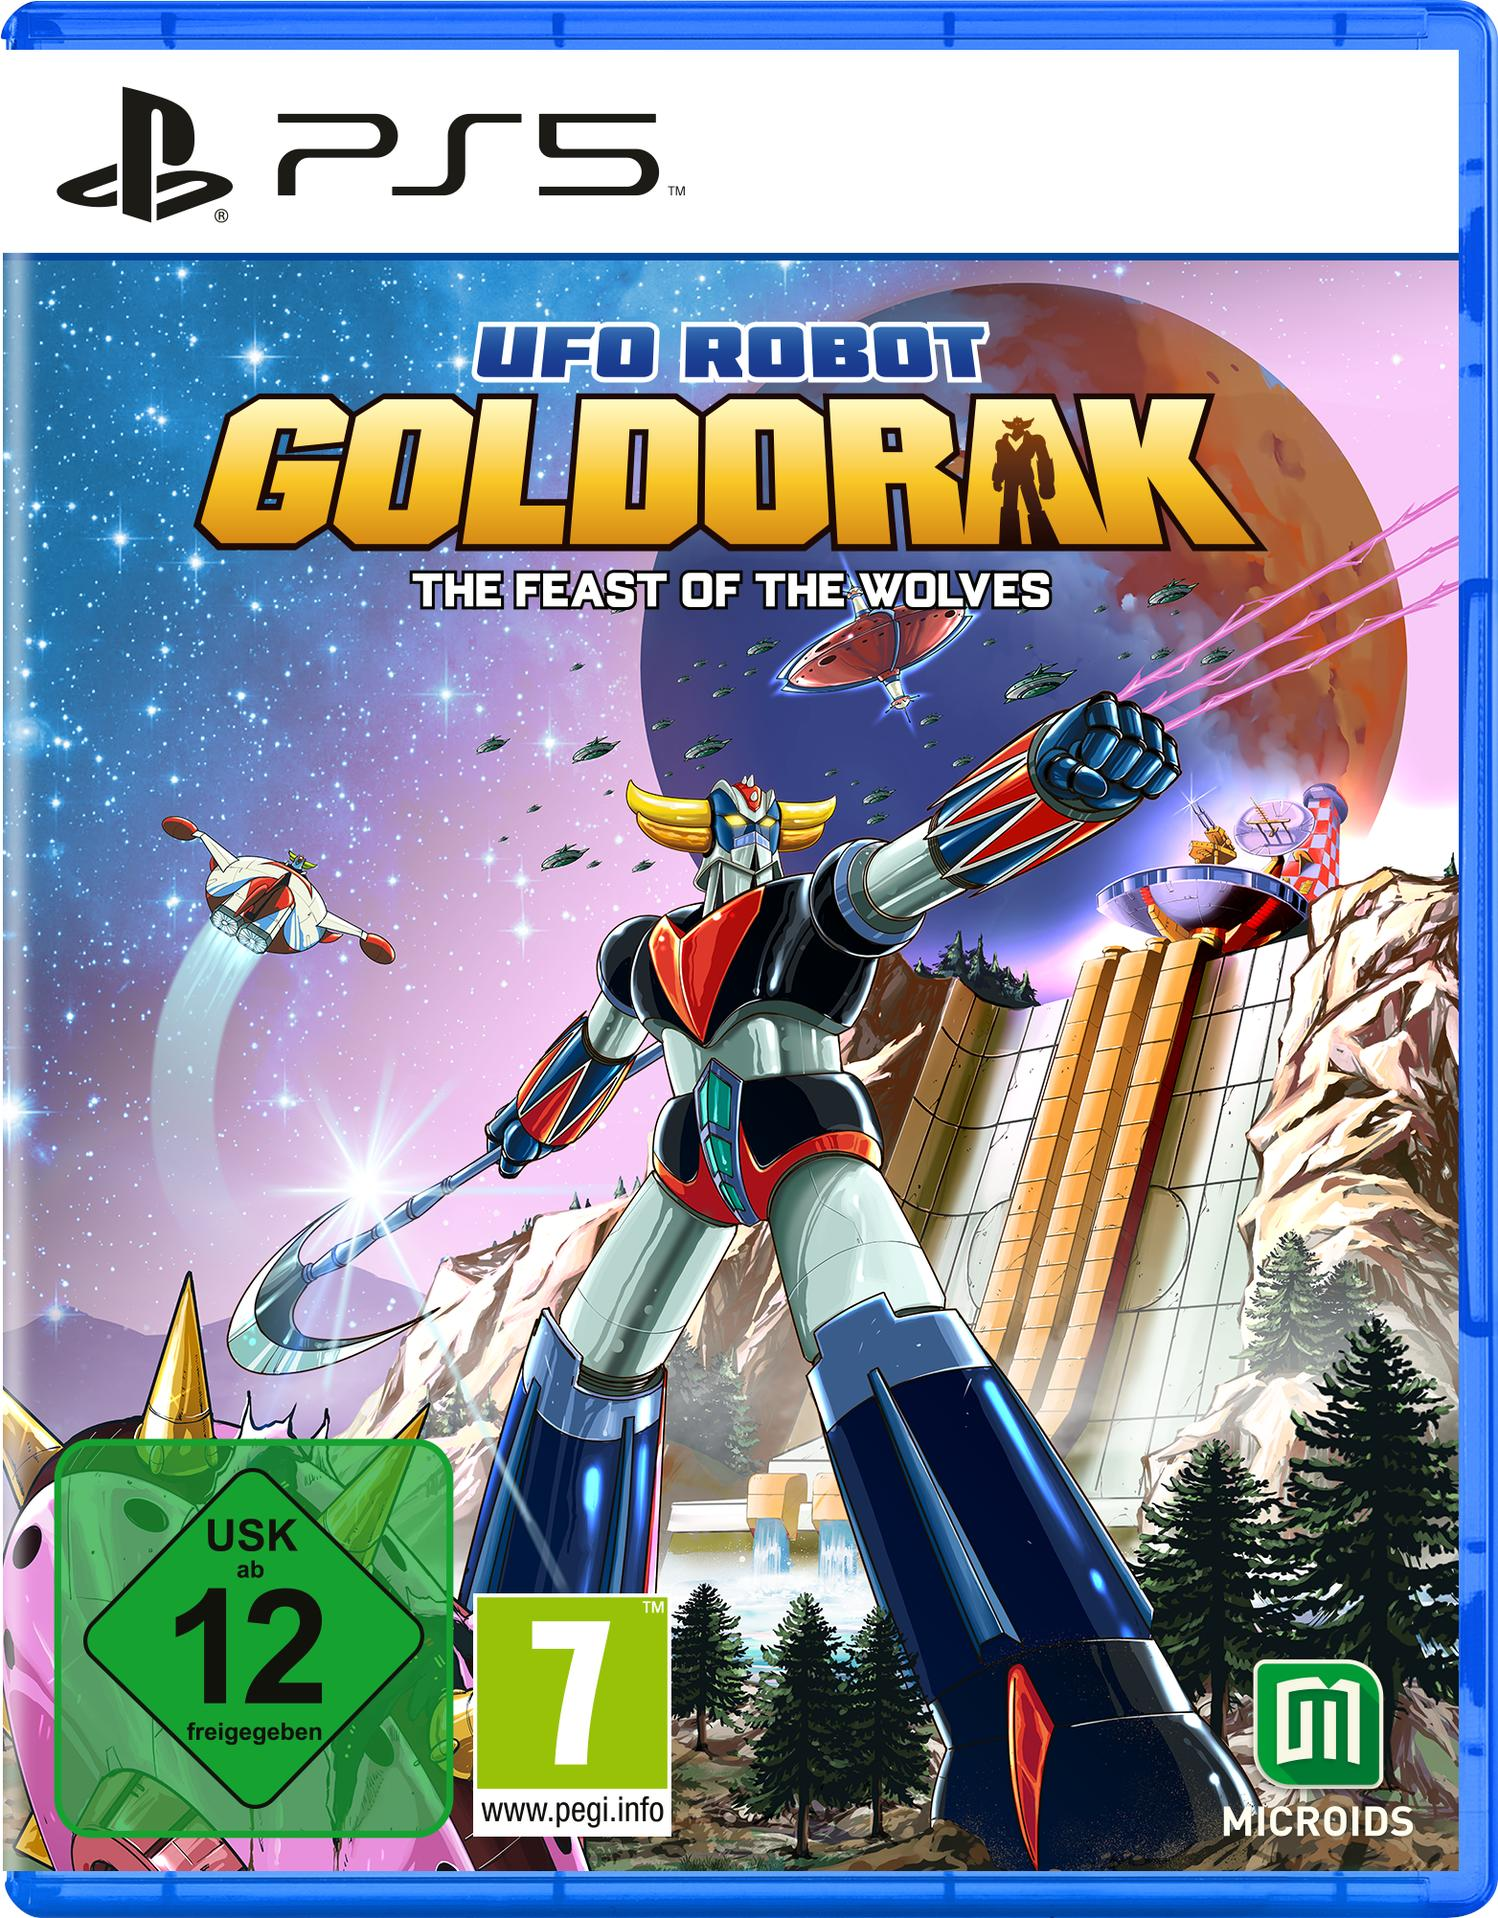 Ufo Robot Goldorak: The Feast Edition - Standard 5] Wolves [PlayStation the - of